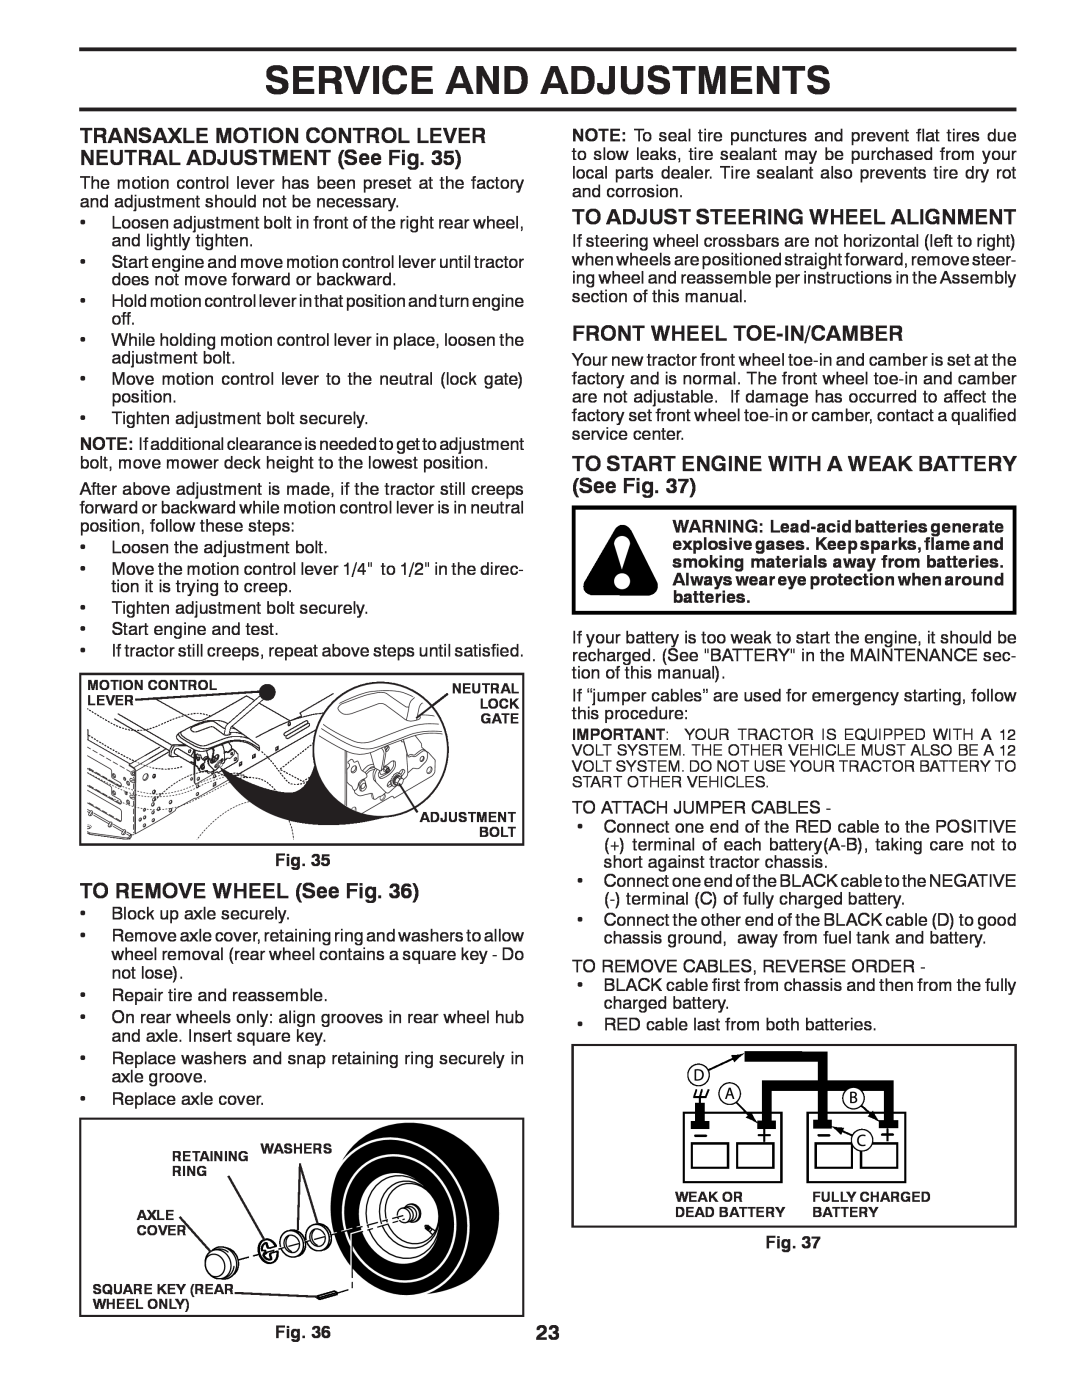 Husqvarna 917.2896 owner manual Service And Adjustments, TRANSAXLE MOTION CONTROL LEVER NEUTRAL ADJUSTMENT See Fig 